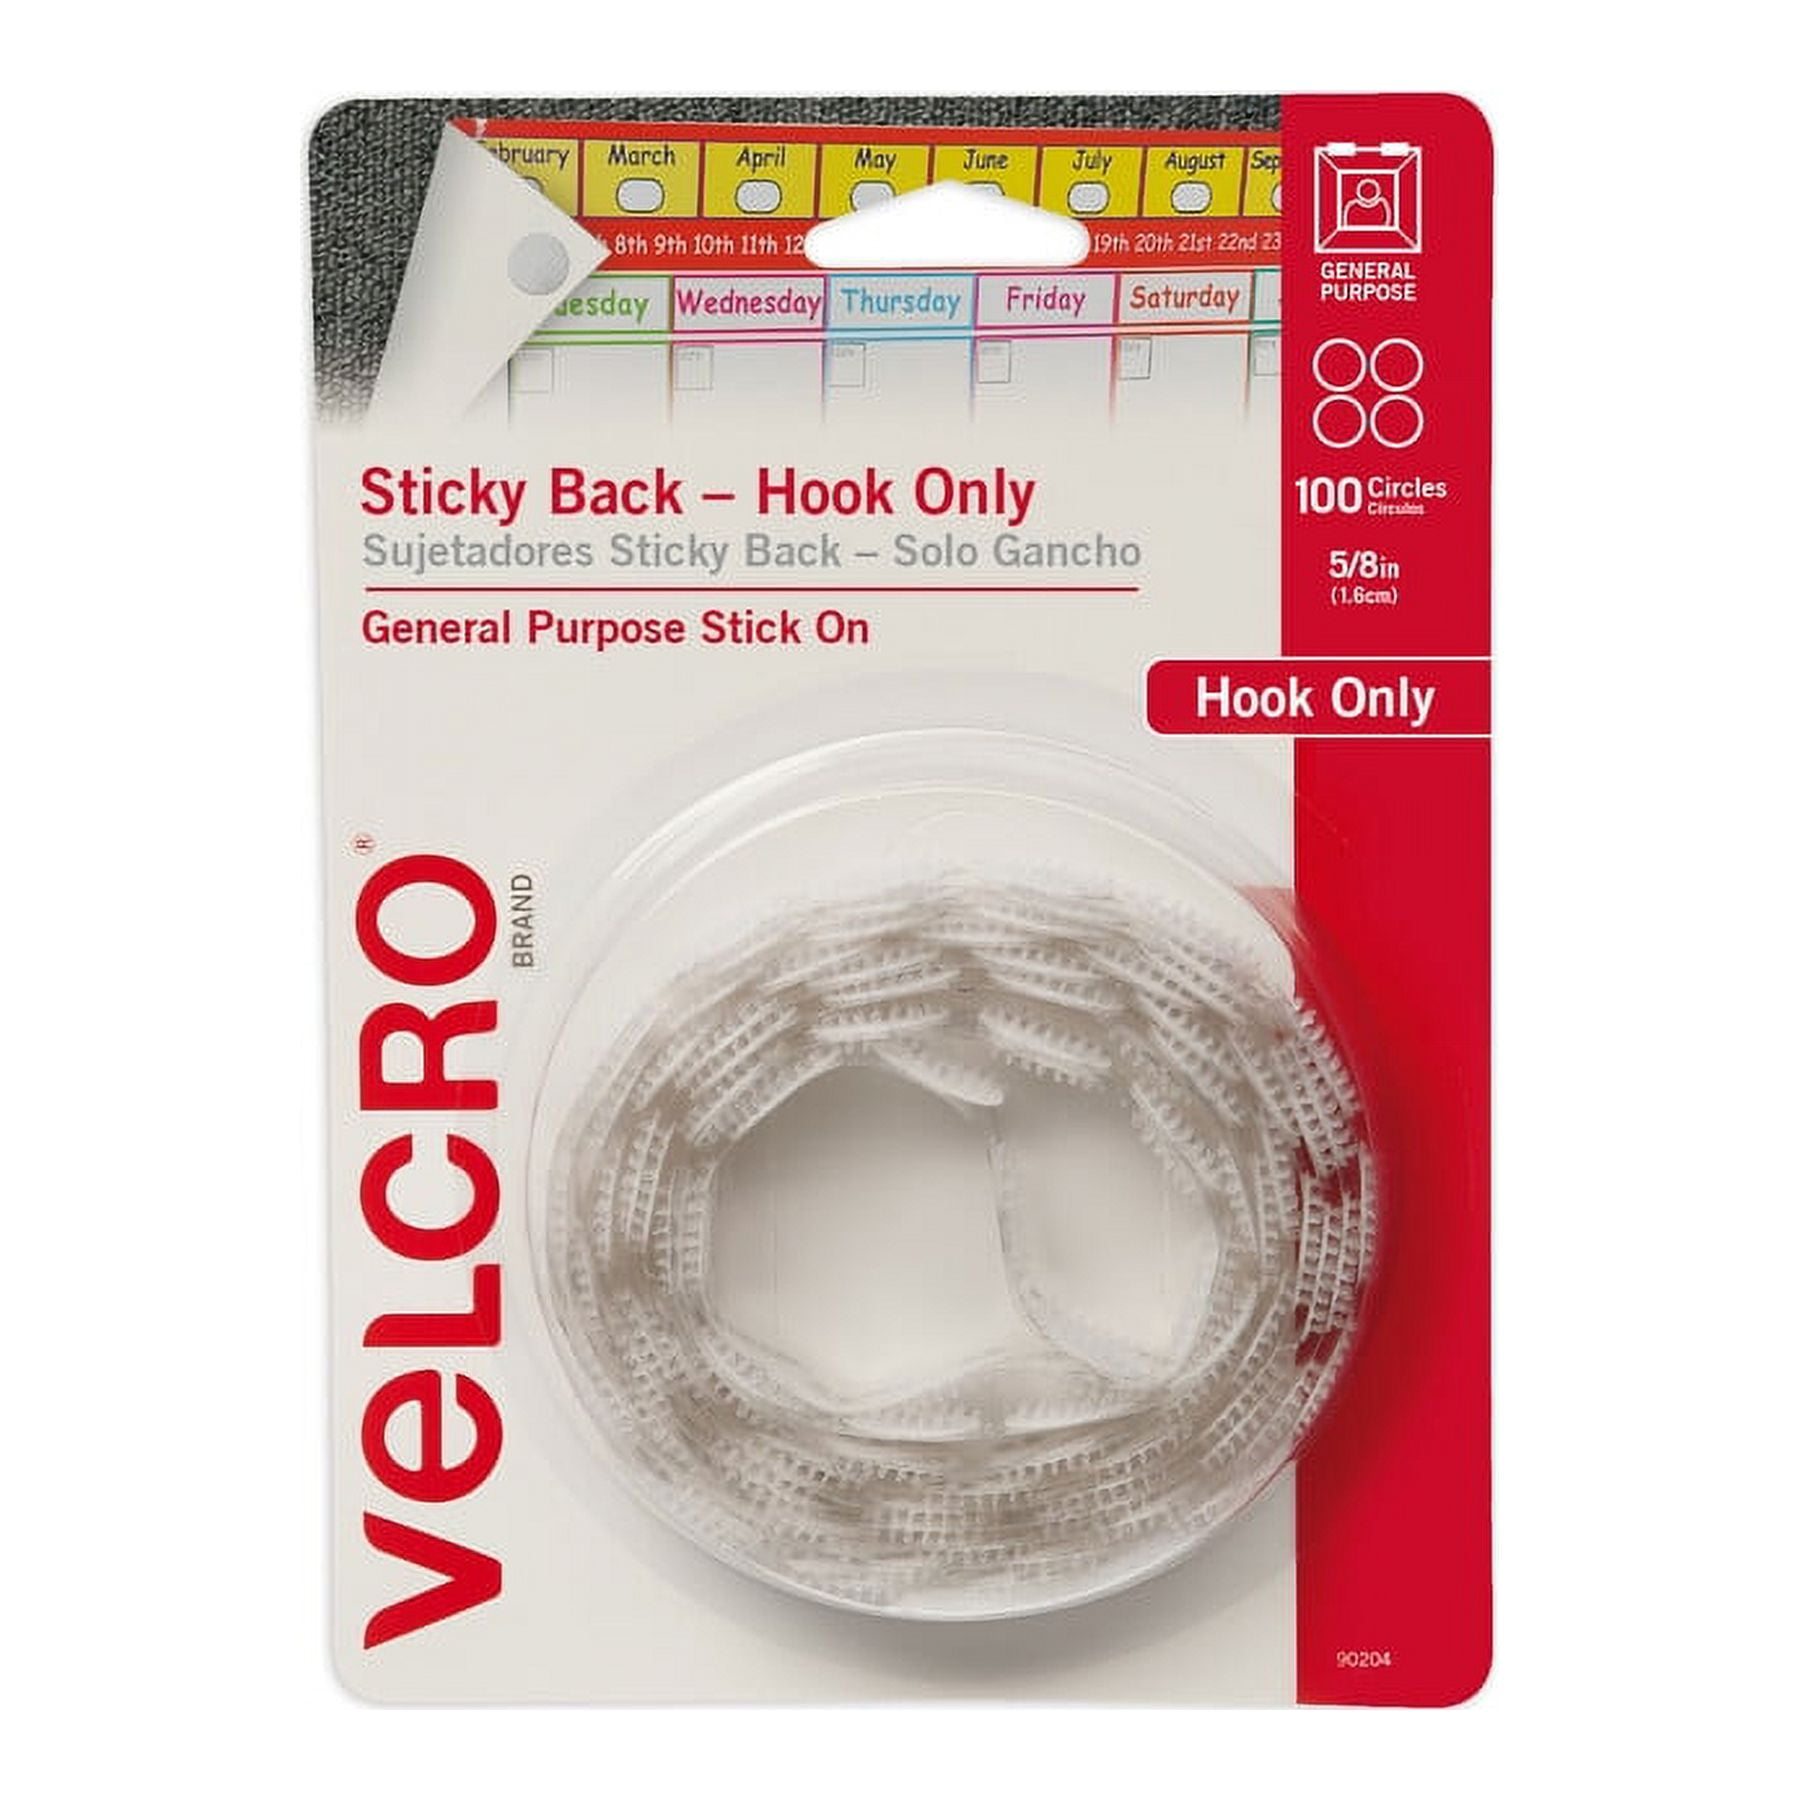 Velcro Brand Hook And Loop Dots 22mm Pack 62  Shop online at NXP for  business supplies. Wide range of office, kitchen, furniture and cleaning  products. Fast delivery, great customer service, 100% Kiwi owned.